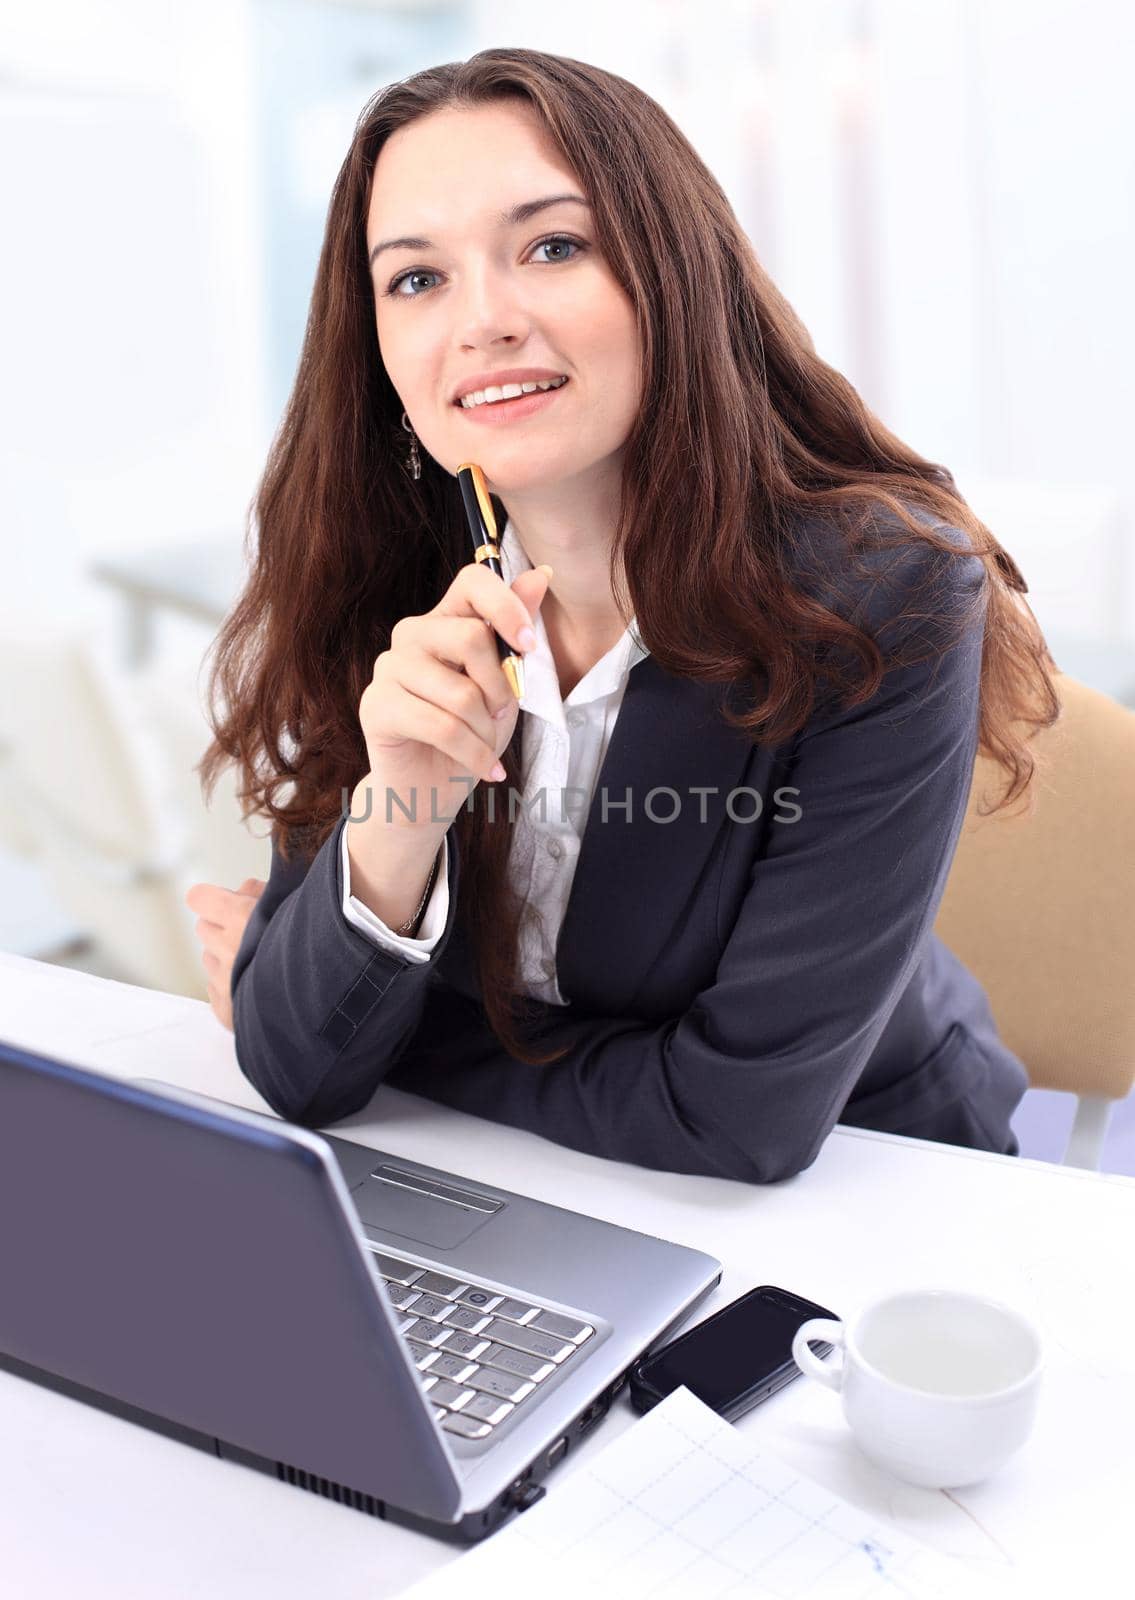 Thoughtful business woman in an office smiling.